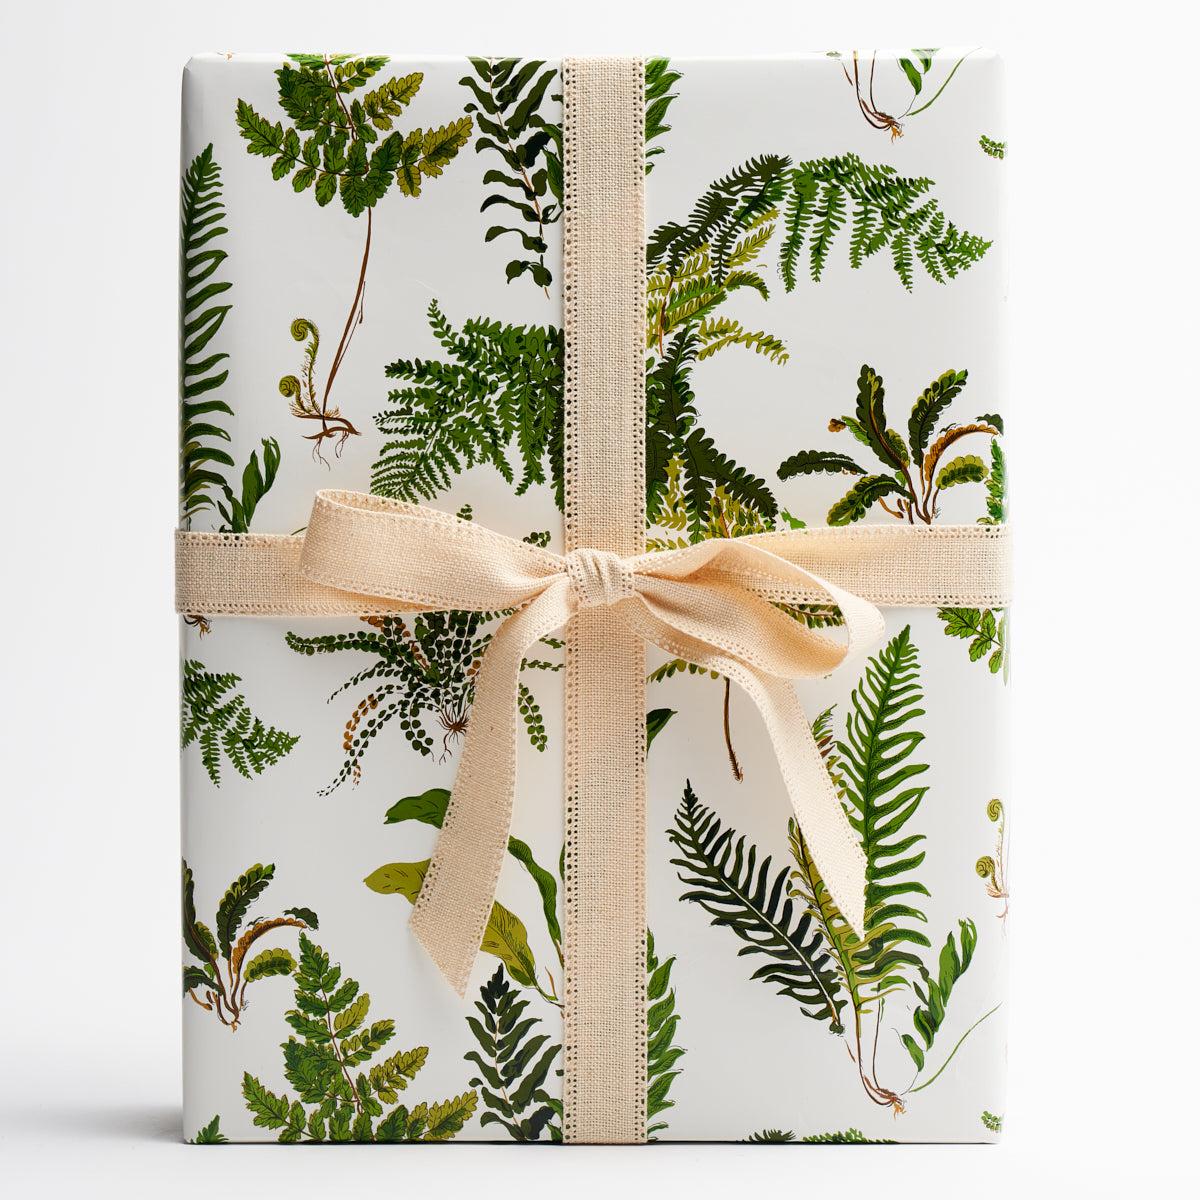 Les Fougeres Wrapping Paper